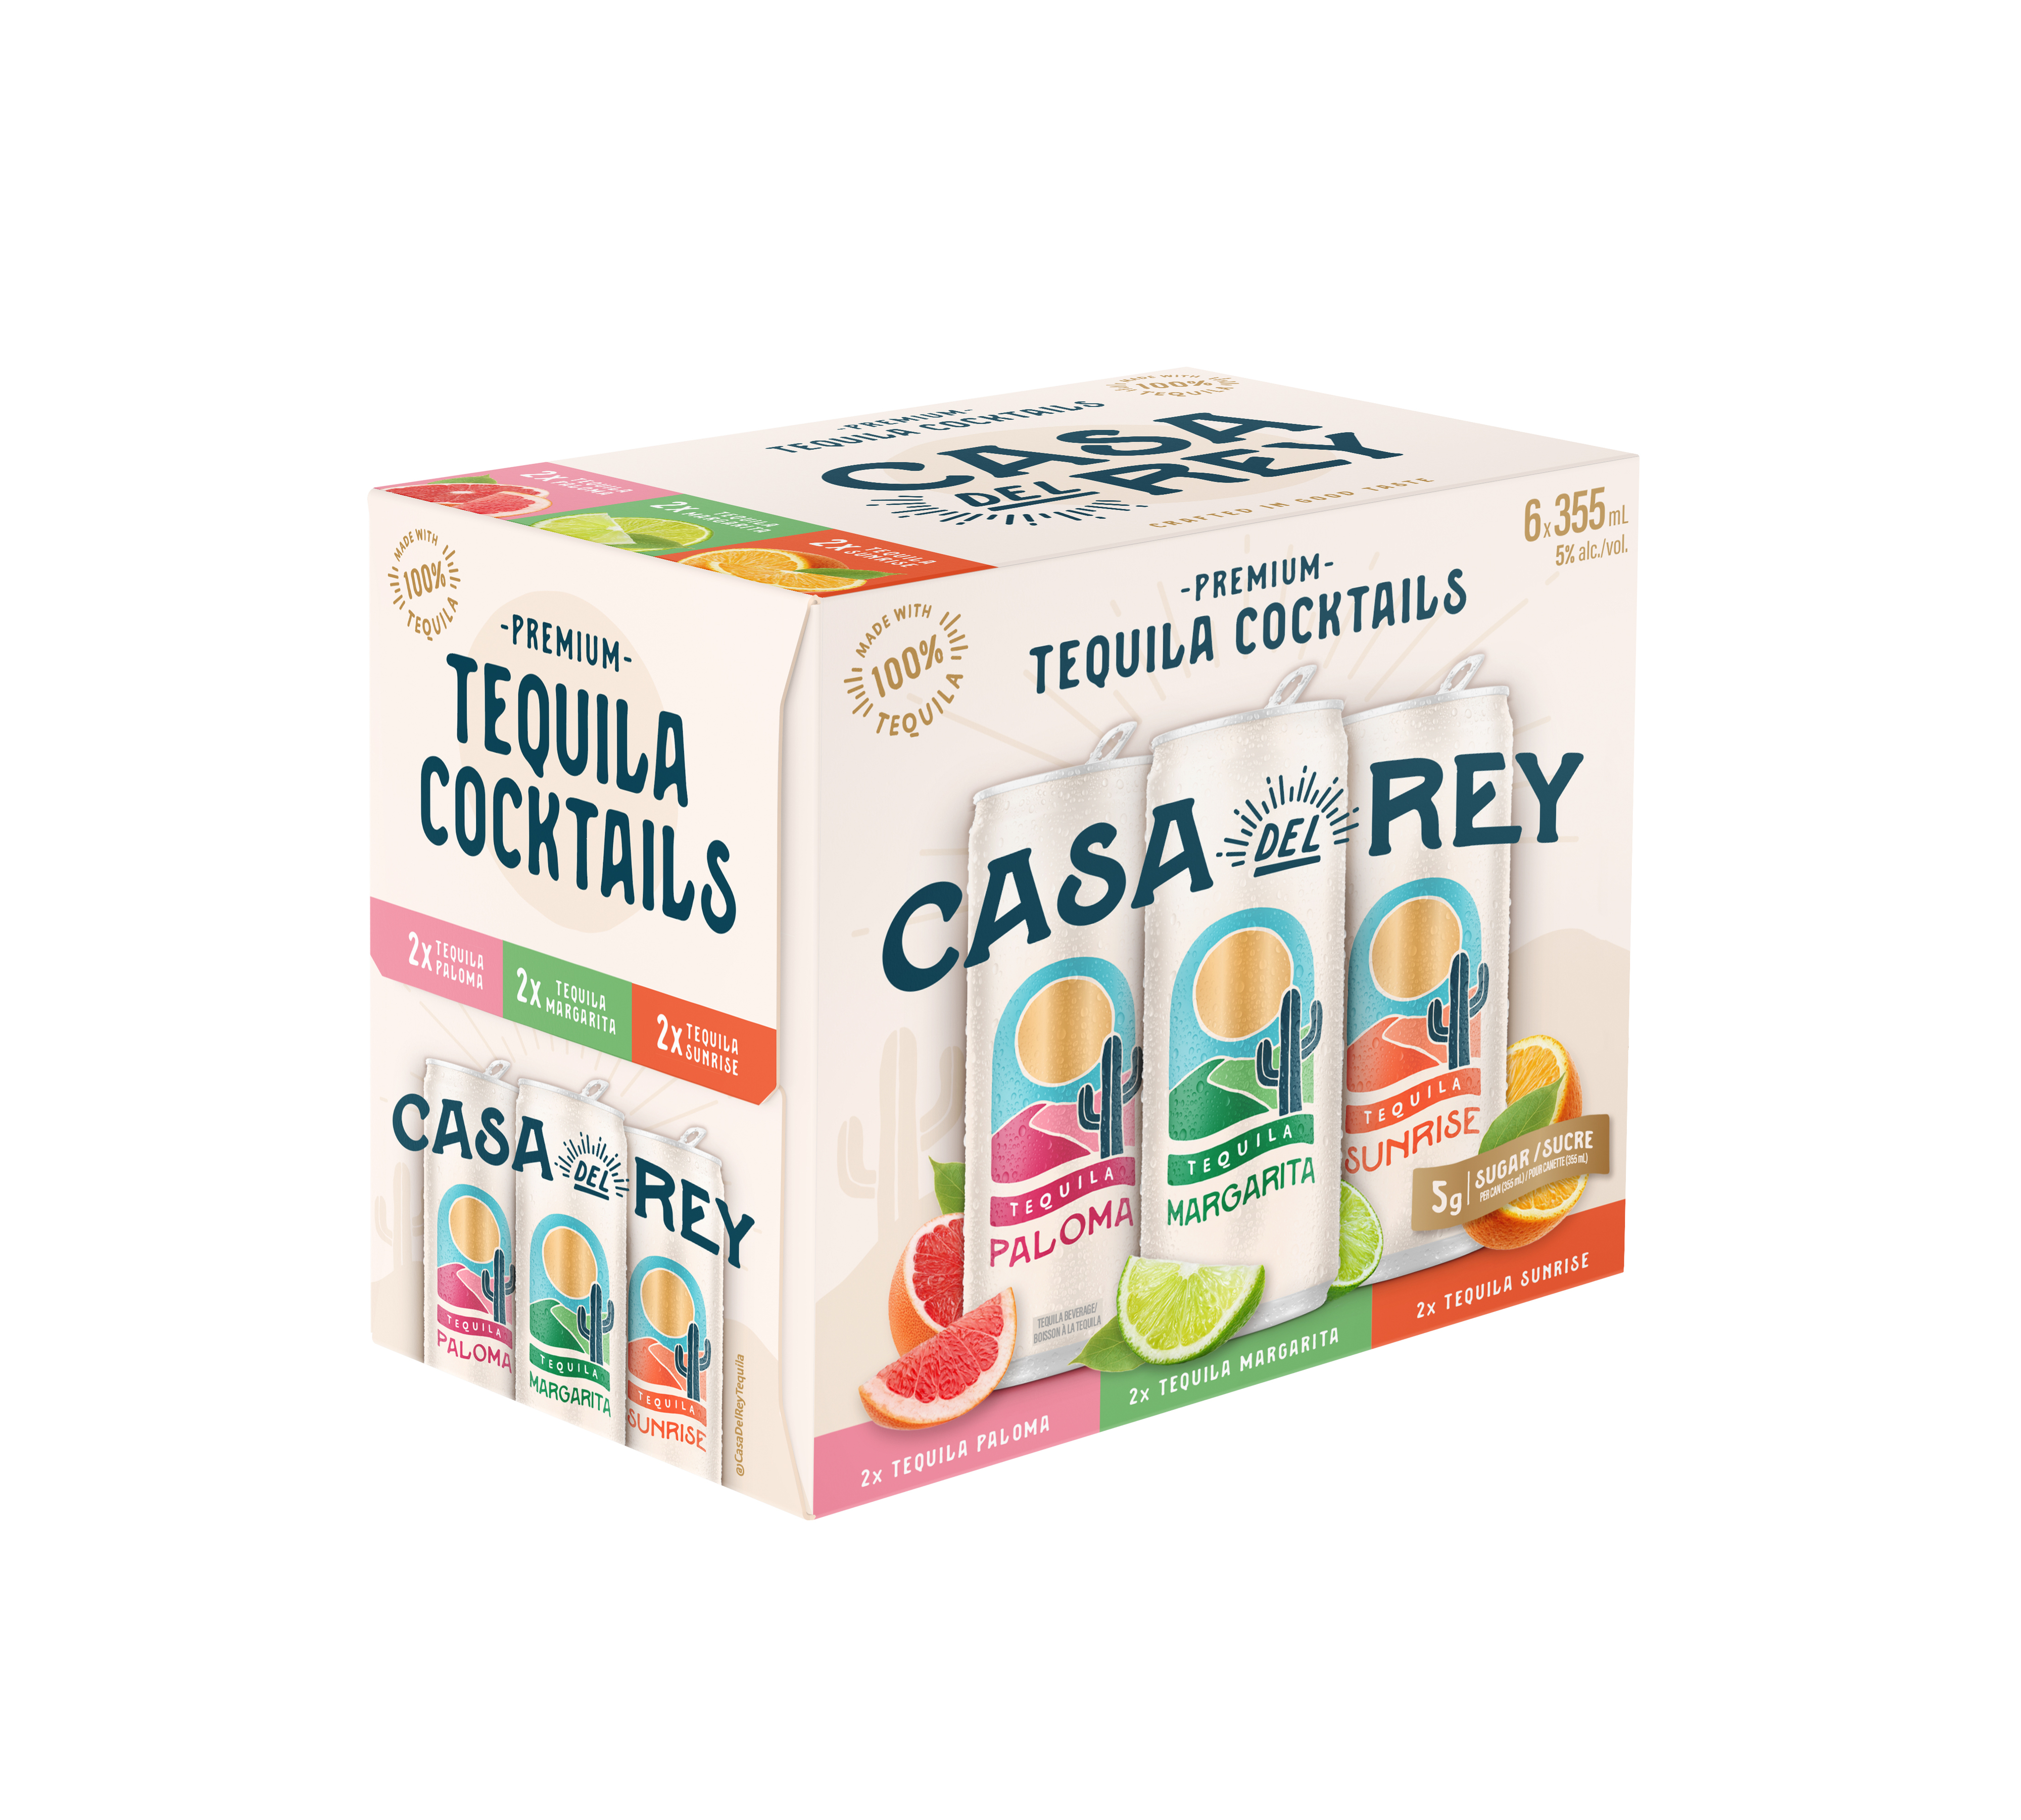 Casa Del Rey premium tequila cocktails packaging with various flavors